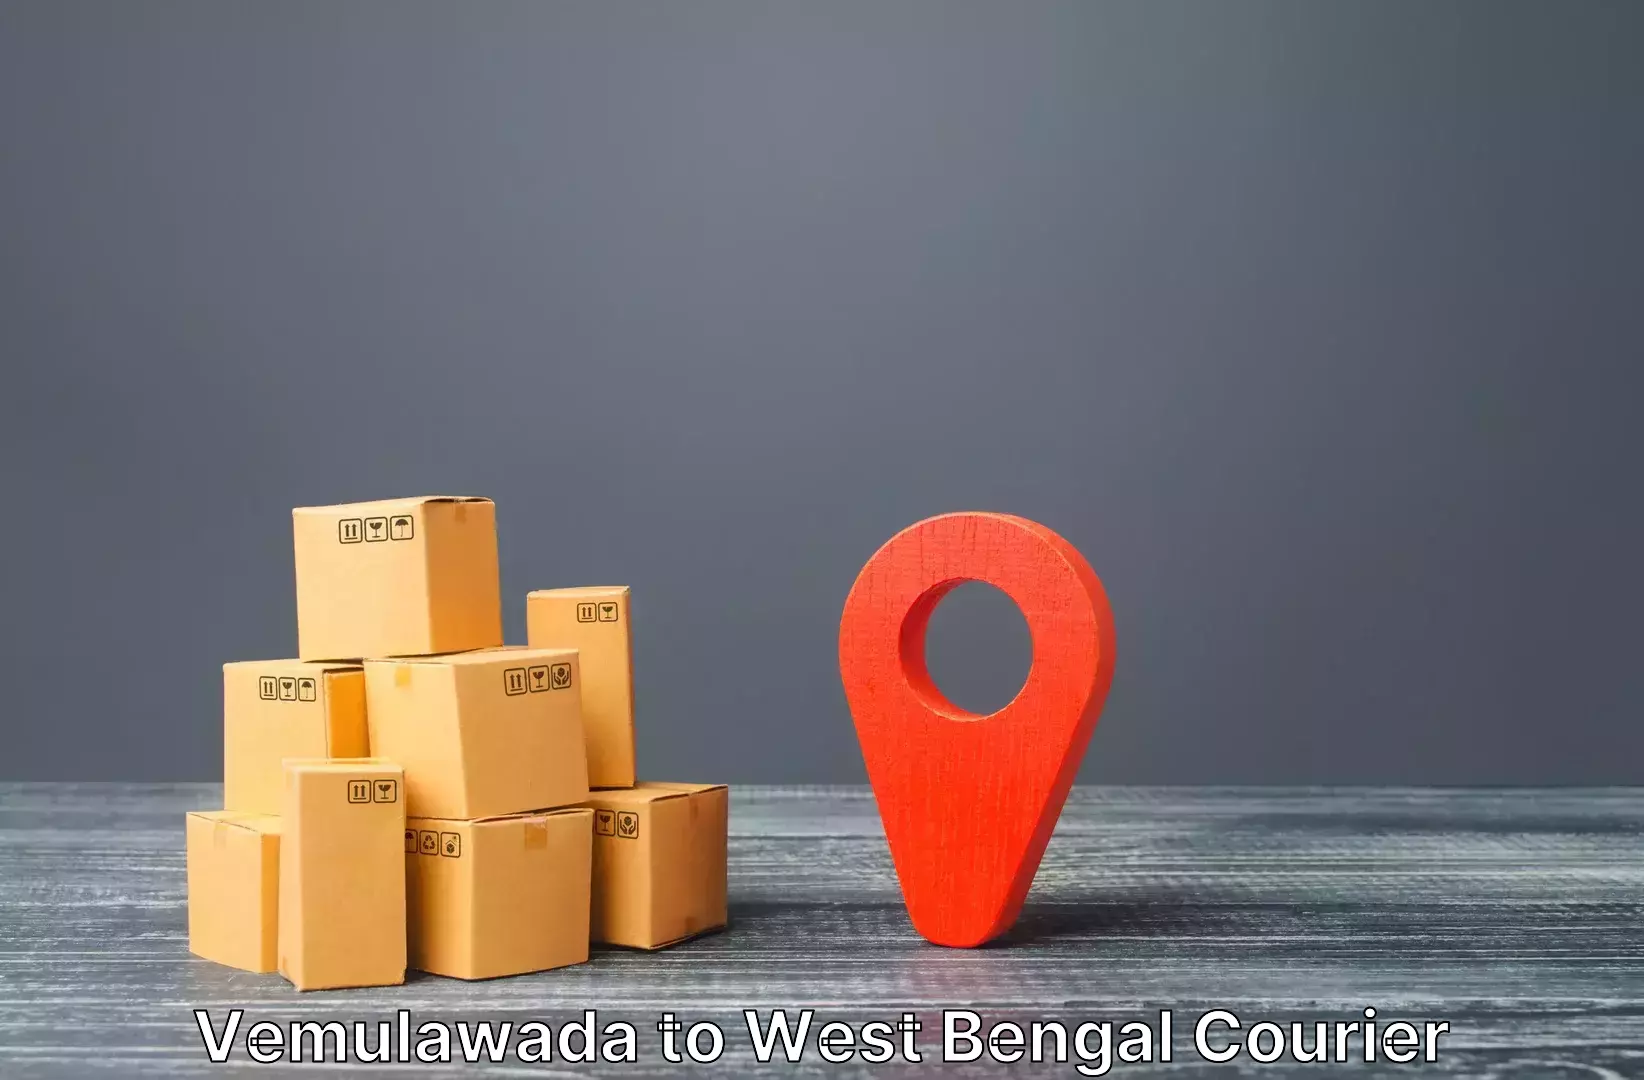 Baggage transport network Vemulawada to West Bengal